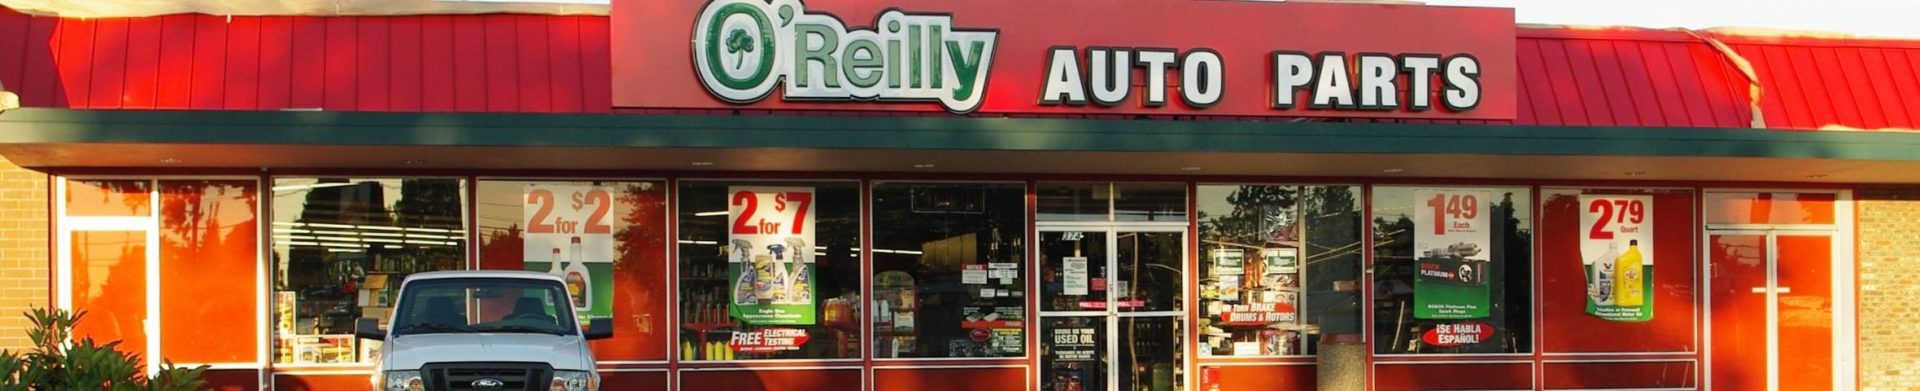 exterior of O'Reilly Auto Parts store showing red building front and green and white company name above windows